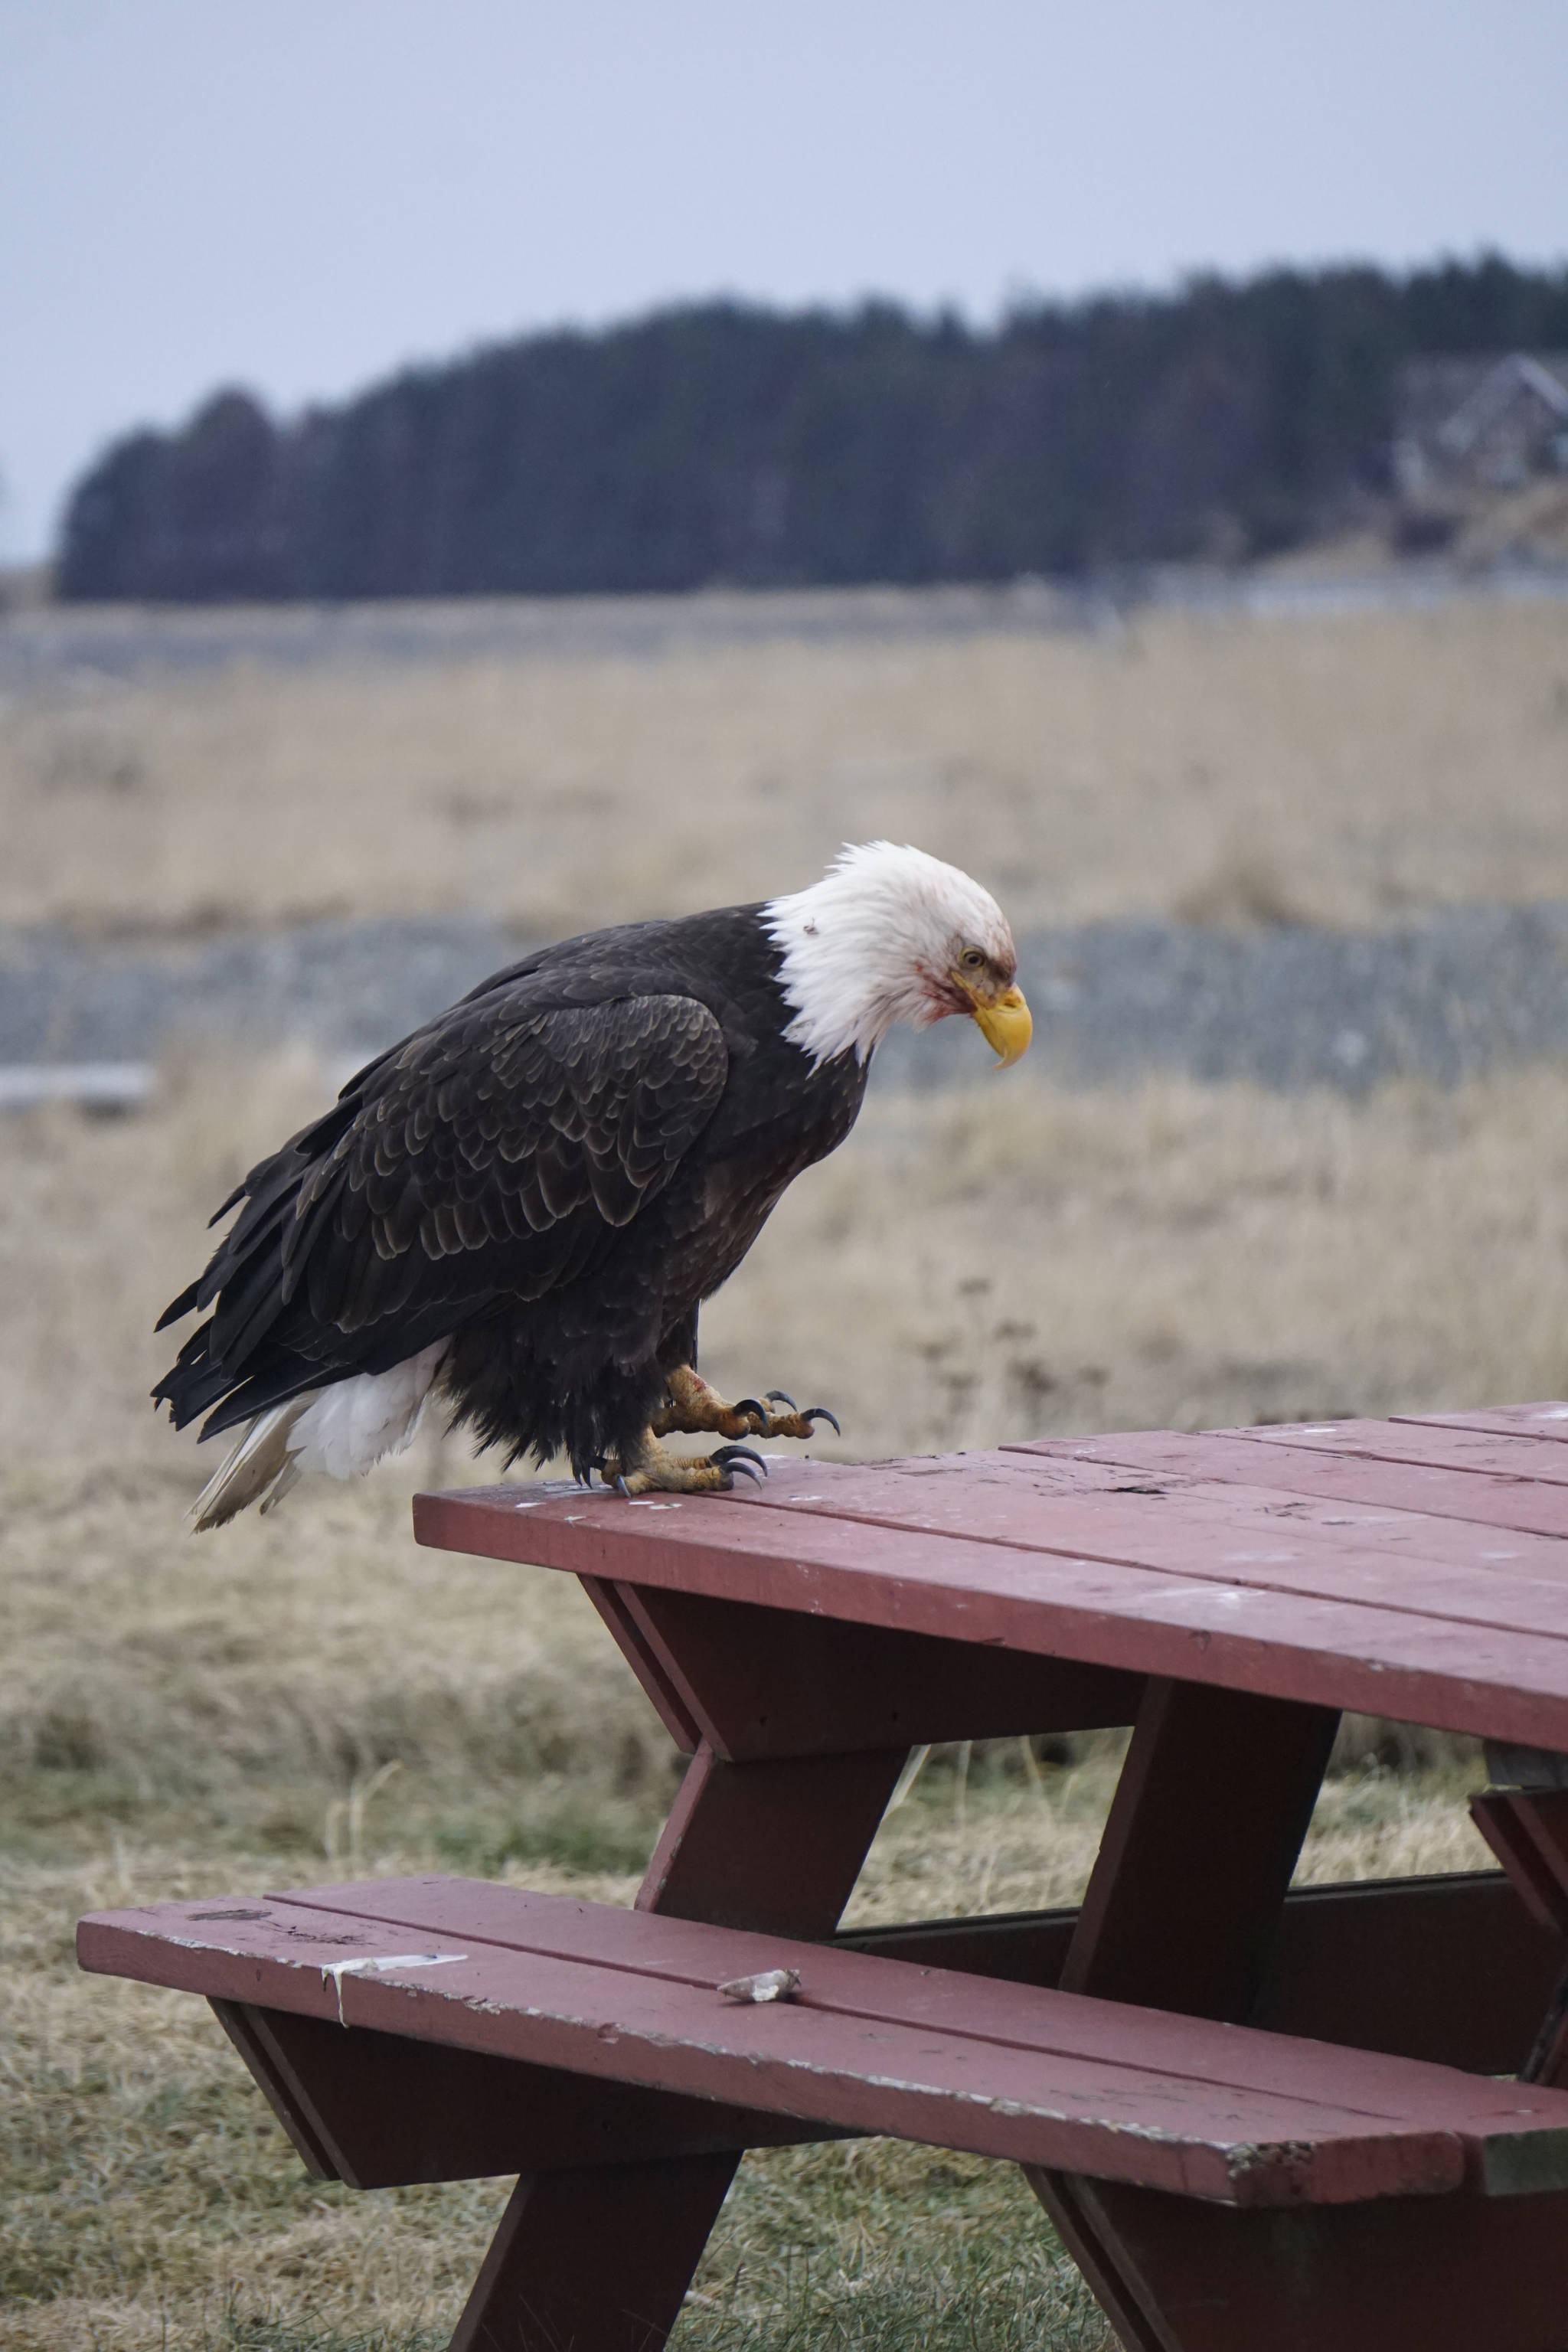 A bald eagle sits on a picnic table at Mariner Park on the Homer Spit on Jan. 28, 2019, in Homer, Alaska. This and other eagles had been feeding on a dead sea otter that washed up on the beach. (Photo by Michael Armstrong/Homer News)